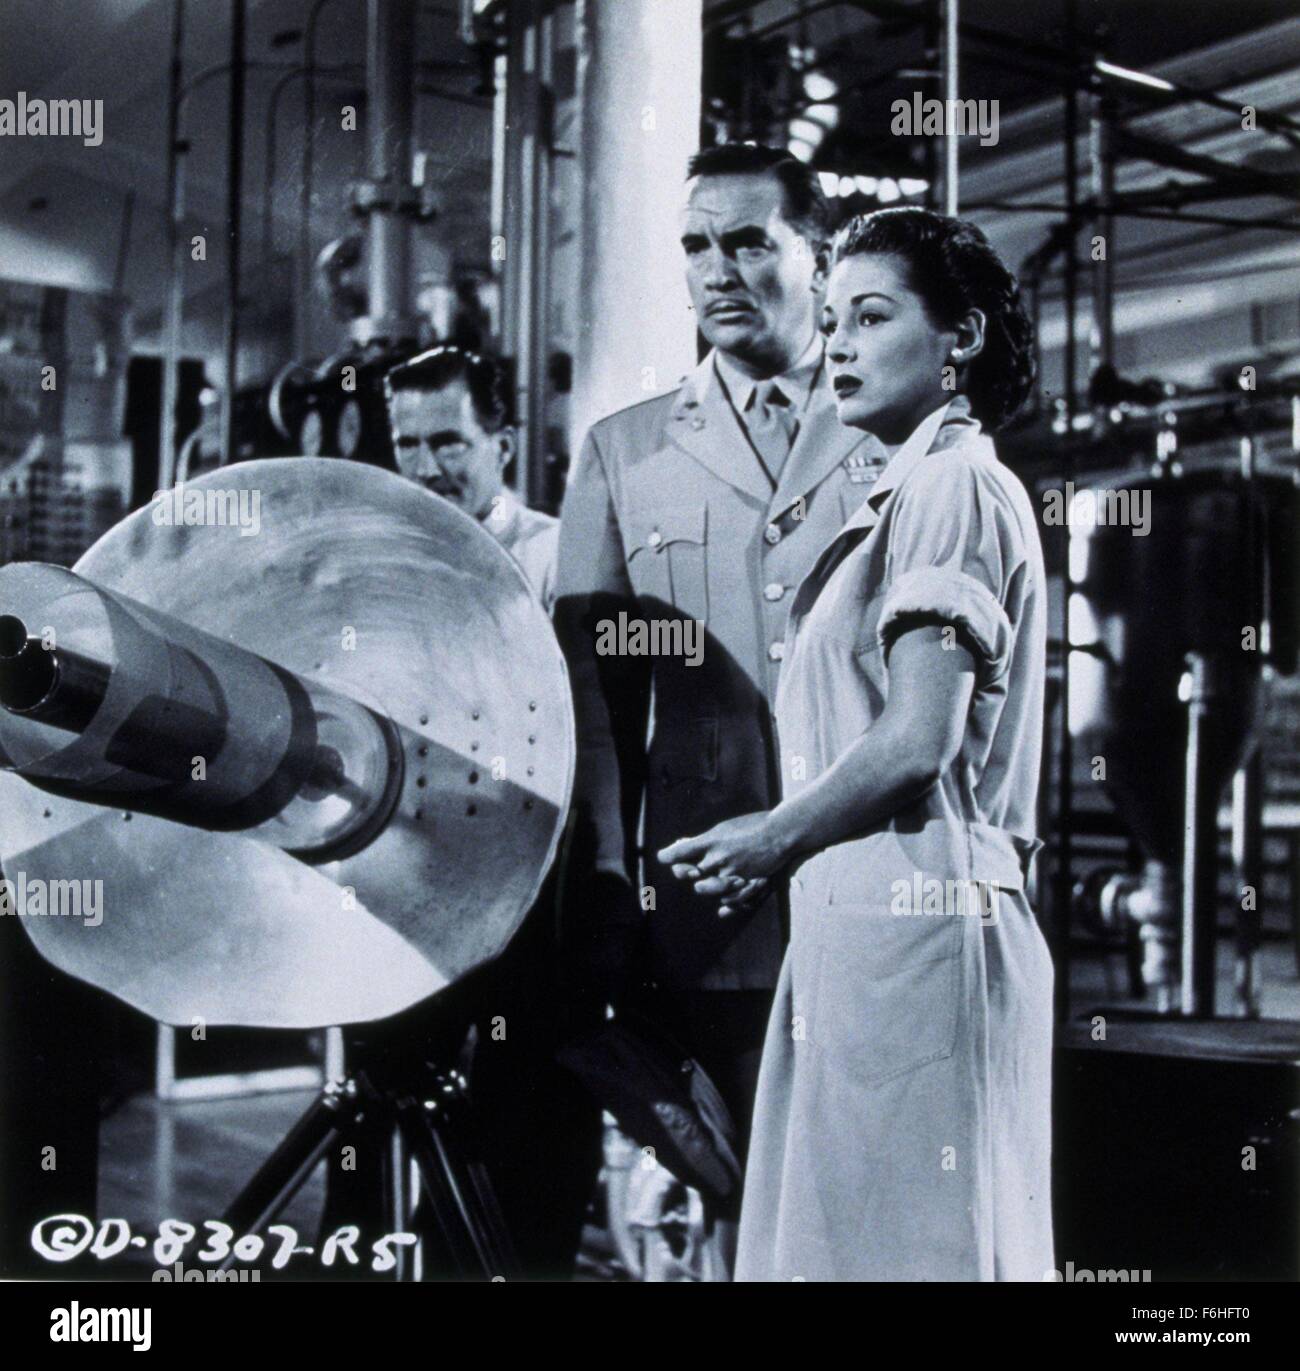 1956, Film Title: EARTH VS. THE FLYING SAUCERS, Director: FRED F SEARS, Studio: COLUMBIA, Pictured: DON CURTIS, HUGH MARLOWE, JOAN TAYLOR, ITS & ALIENS! THINGS, SCI-FI, RAY GUN, WEAPON, GUN, STERN, SERIOUS, WAR, AFRAID. (Credit Image: SNAP) Stock Photo